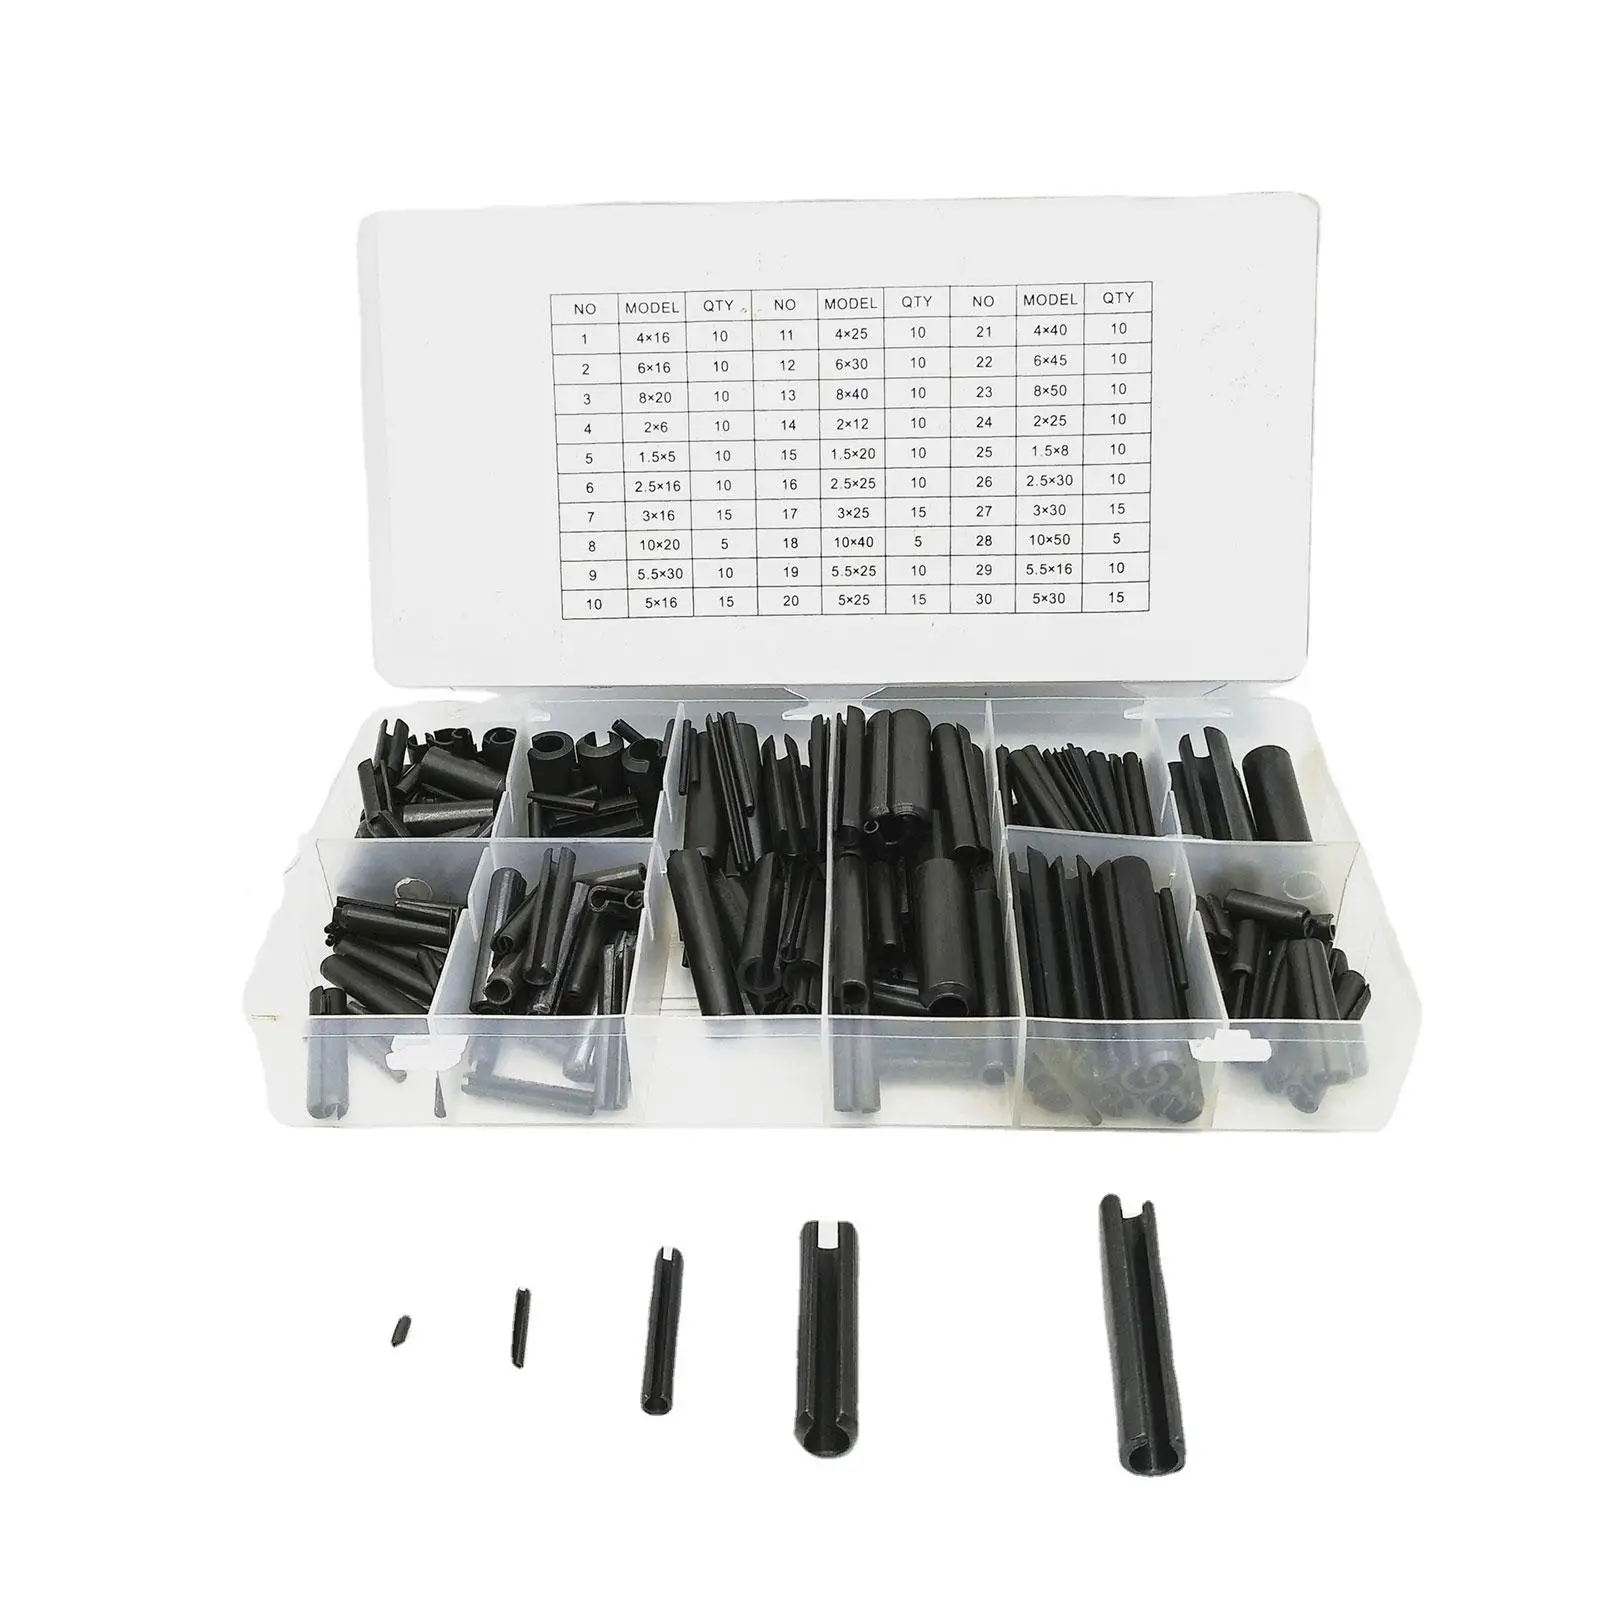 315Pcs Slotted Spring Tension Pins Black with Storage Case Multiple Sizes M1.5-M10 Sturdy Assortment Set for Mechanics